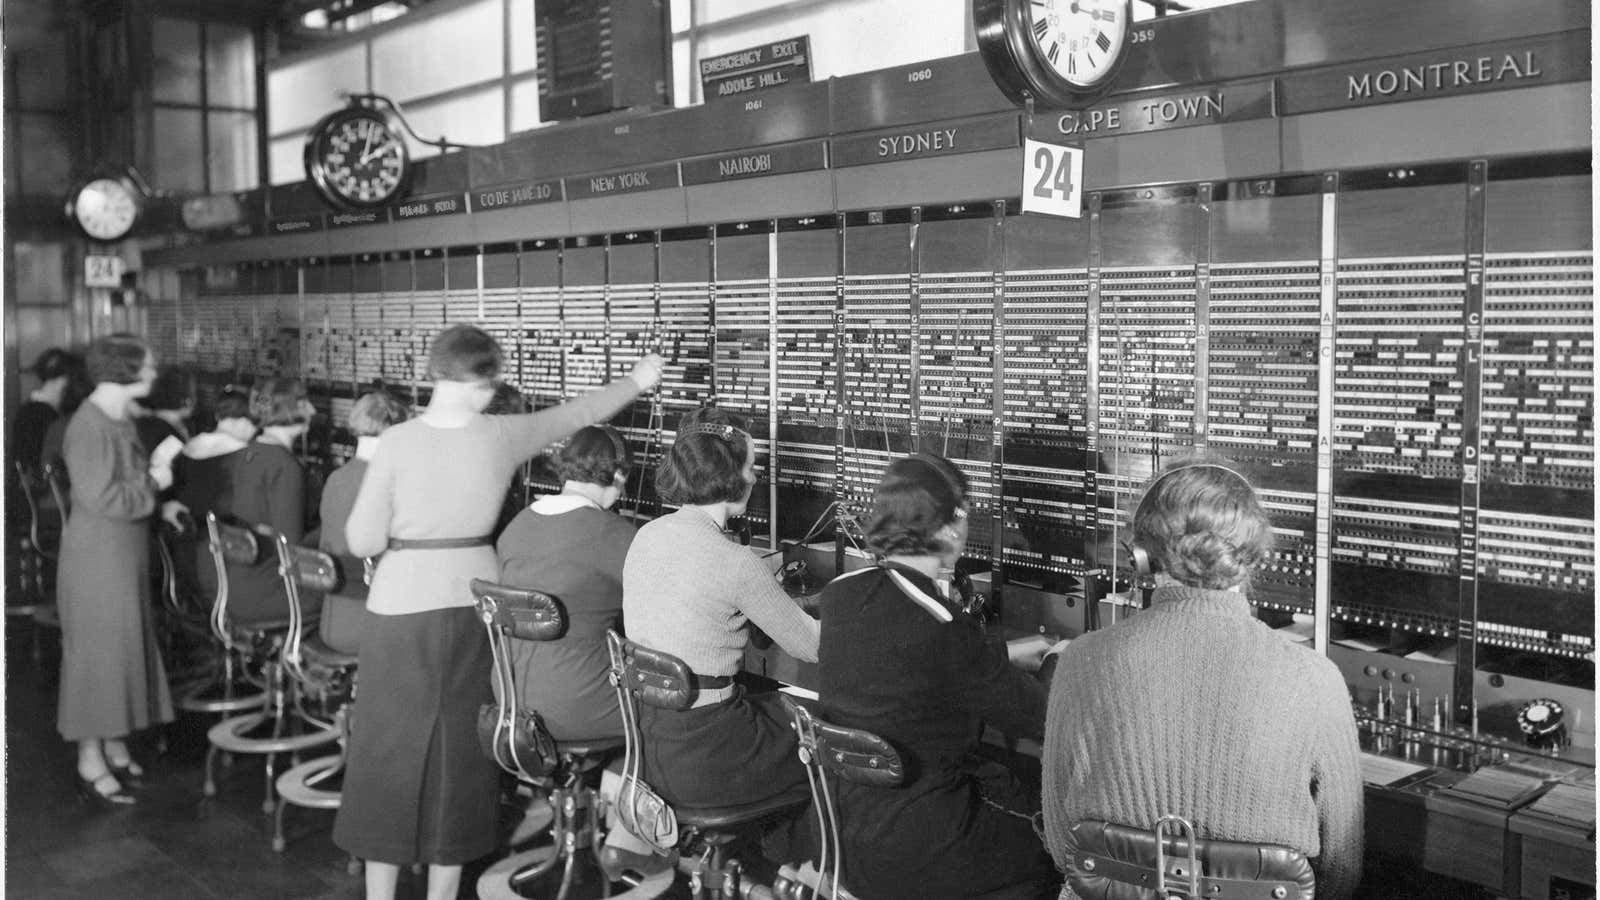 Will the social service center of the future resemble call centers of the past?